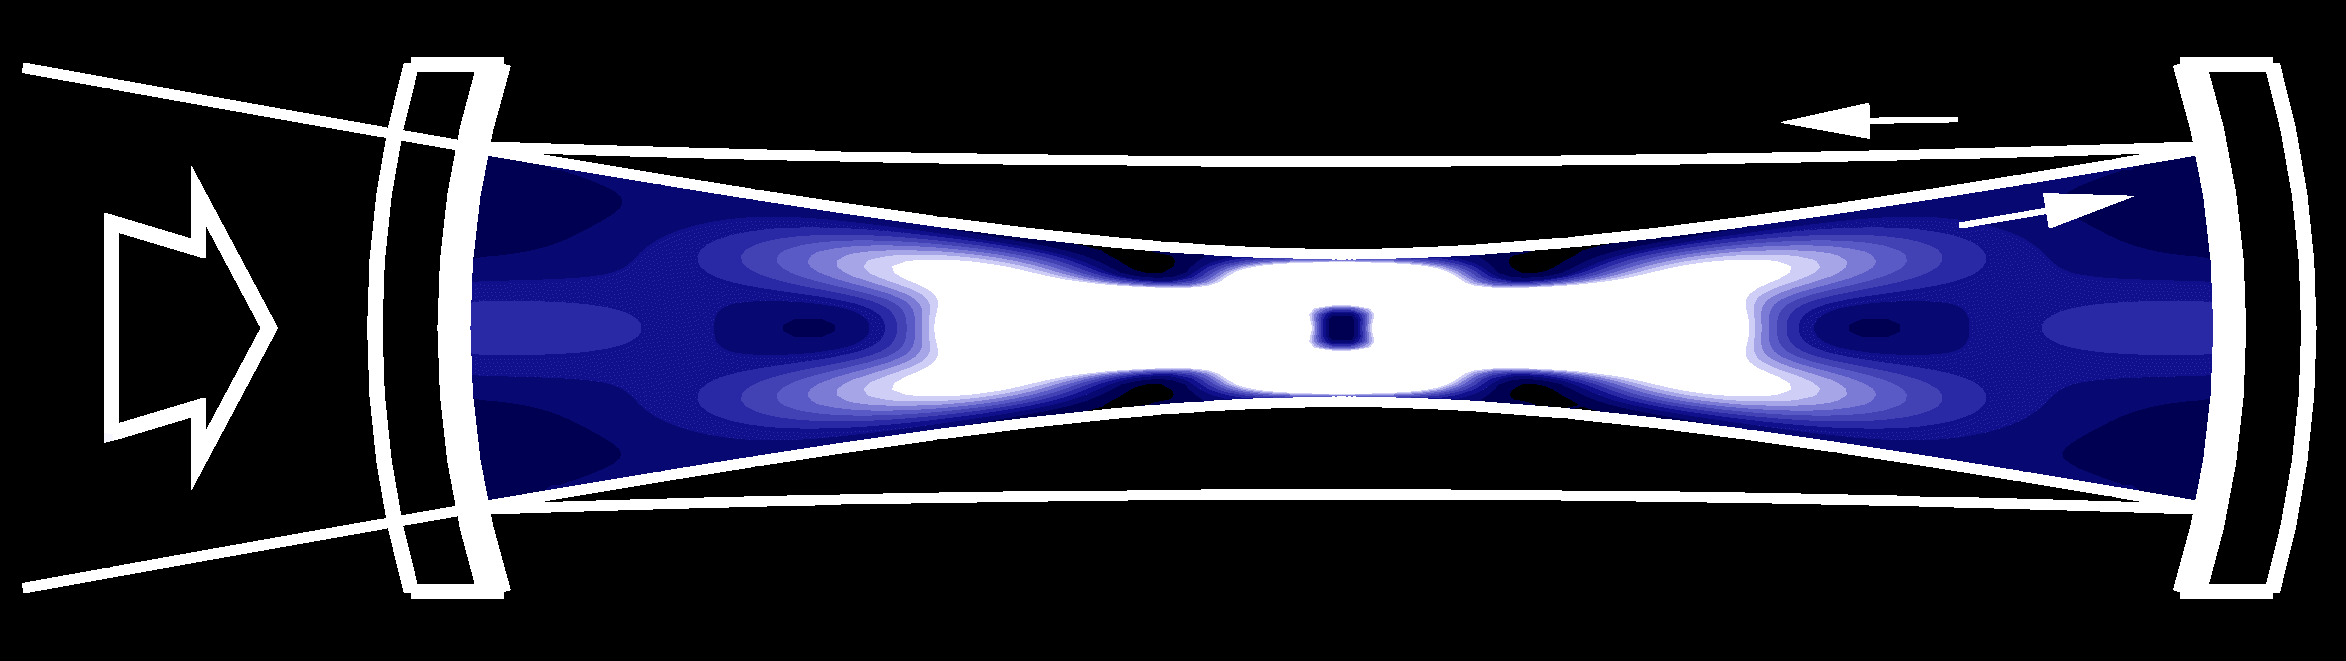 Tailored optical field enhanced in a resonant confocal cavity: optical bottle using the blue-detuned dipole force.